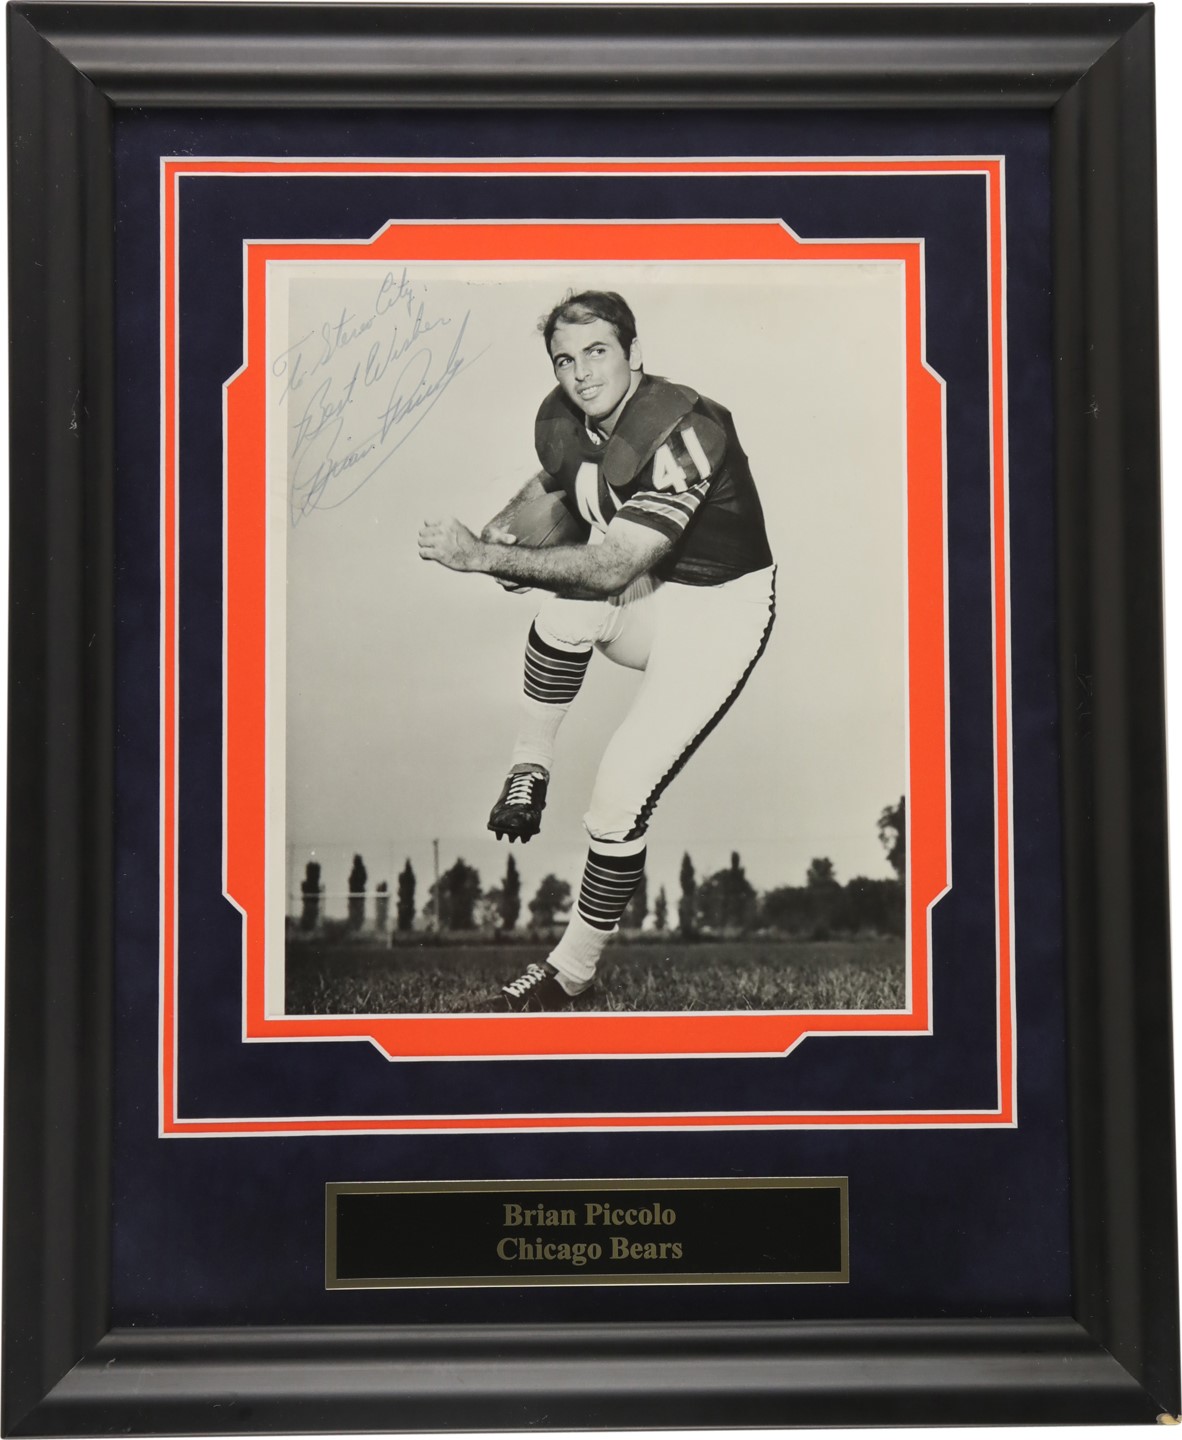 - Brian Piccolo Signed Chicago Bears Photograph (PSA)